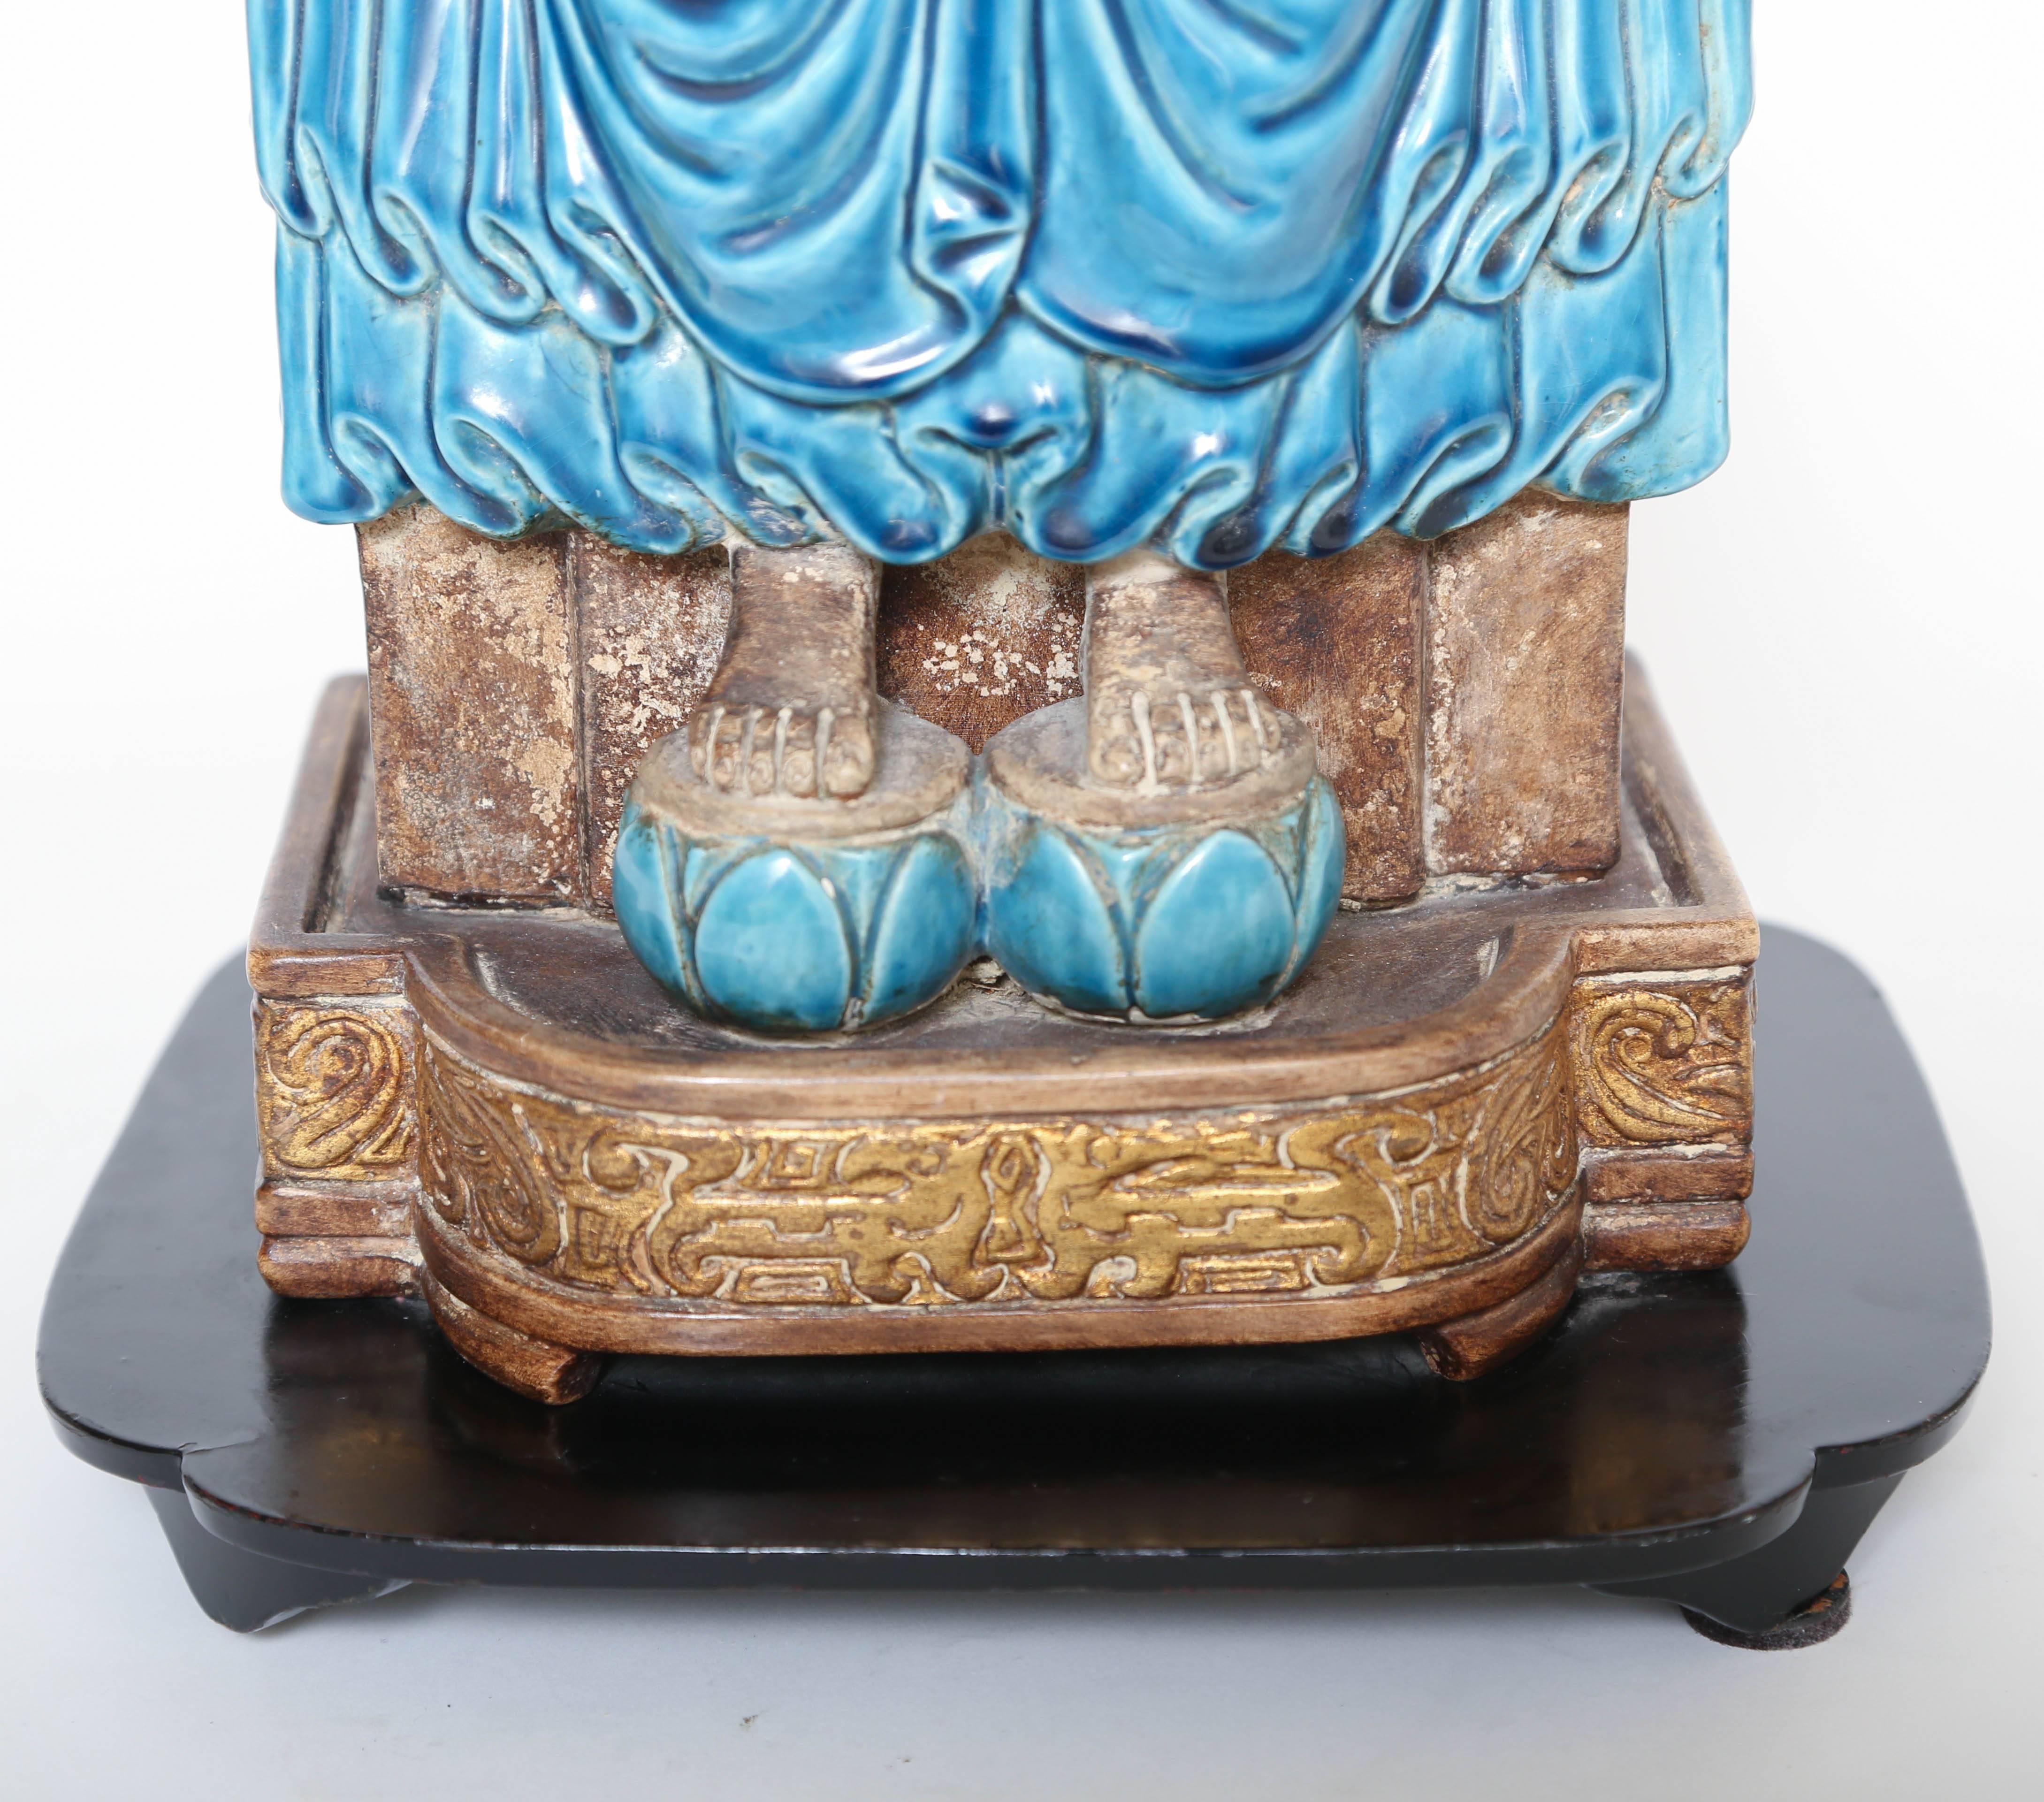 Glazed Turquoise and Parcel-Gilt Terracotta Buddha on Stand For Sale